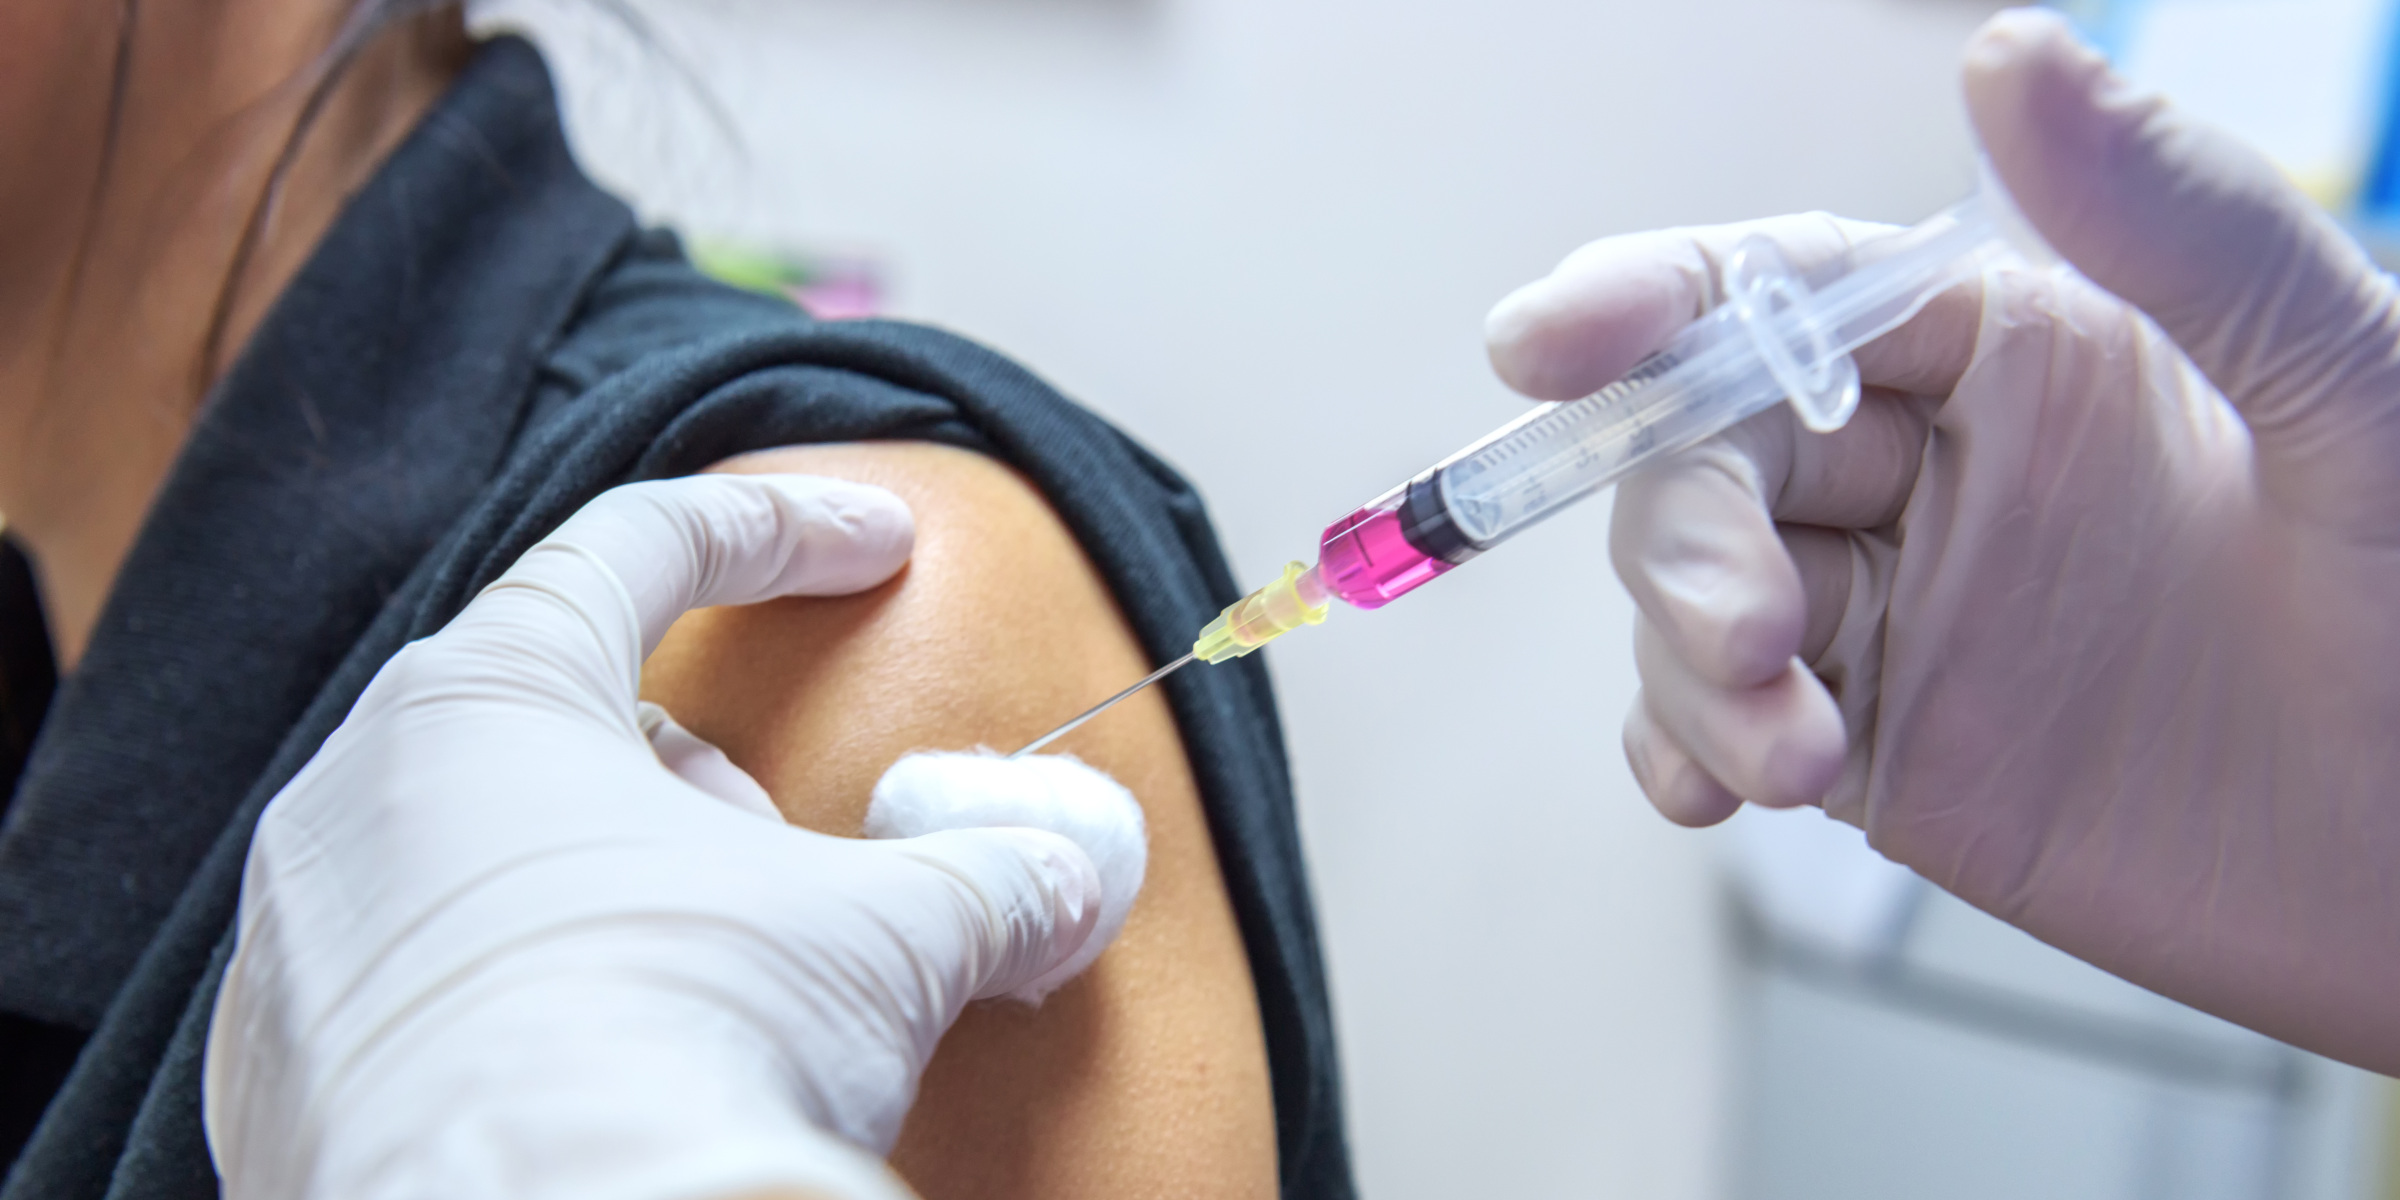 New Flu Vaccine to Protect Against All Influenza Viruses - A Healing Practice